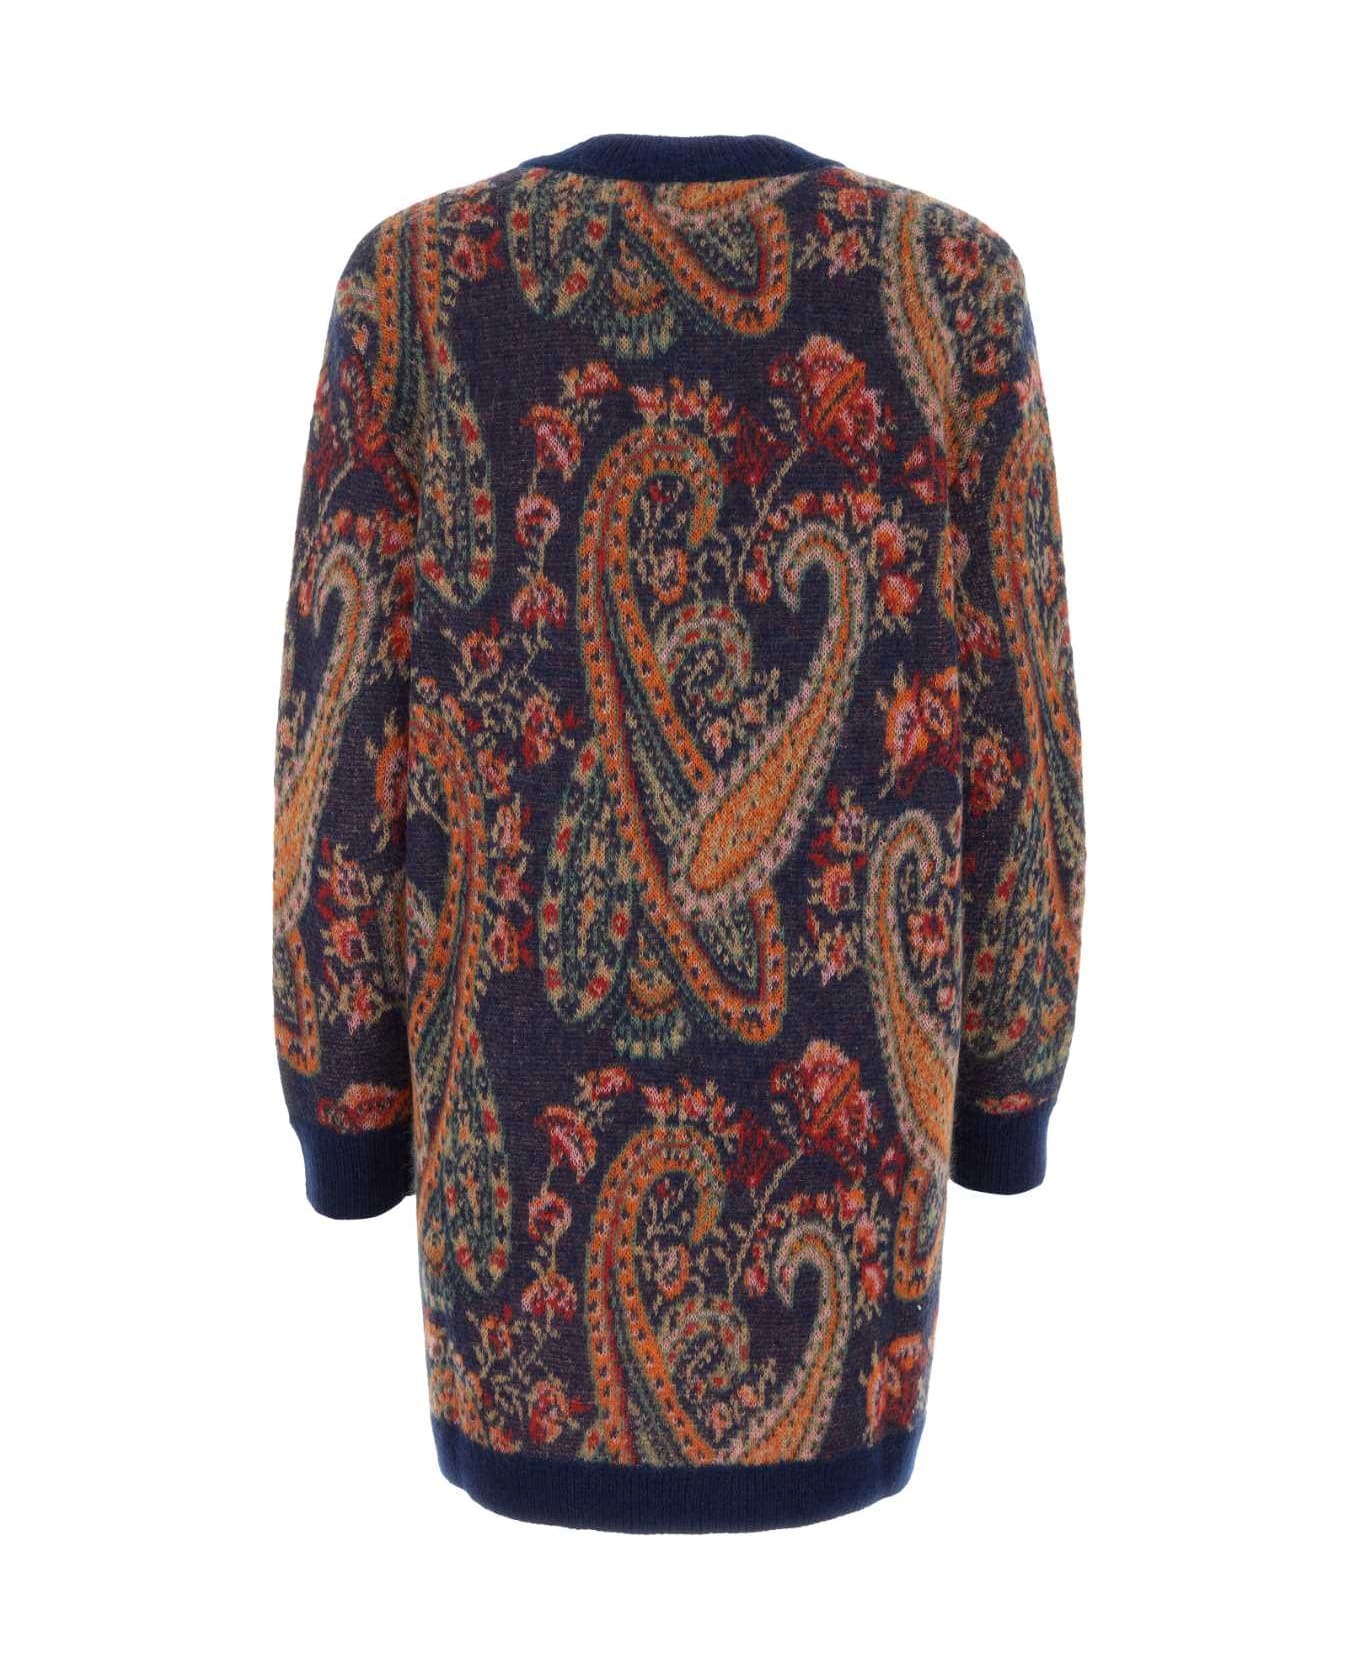 Etro Embroidered Mohair Blend Cardigan - 0200